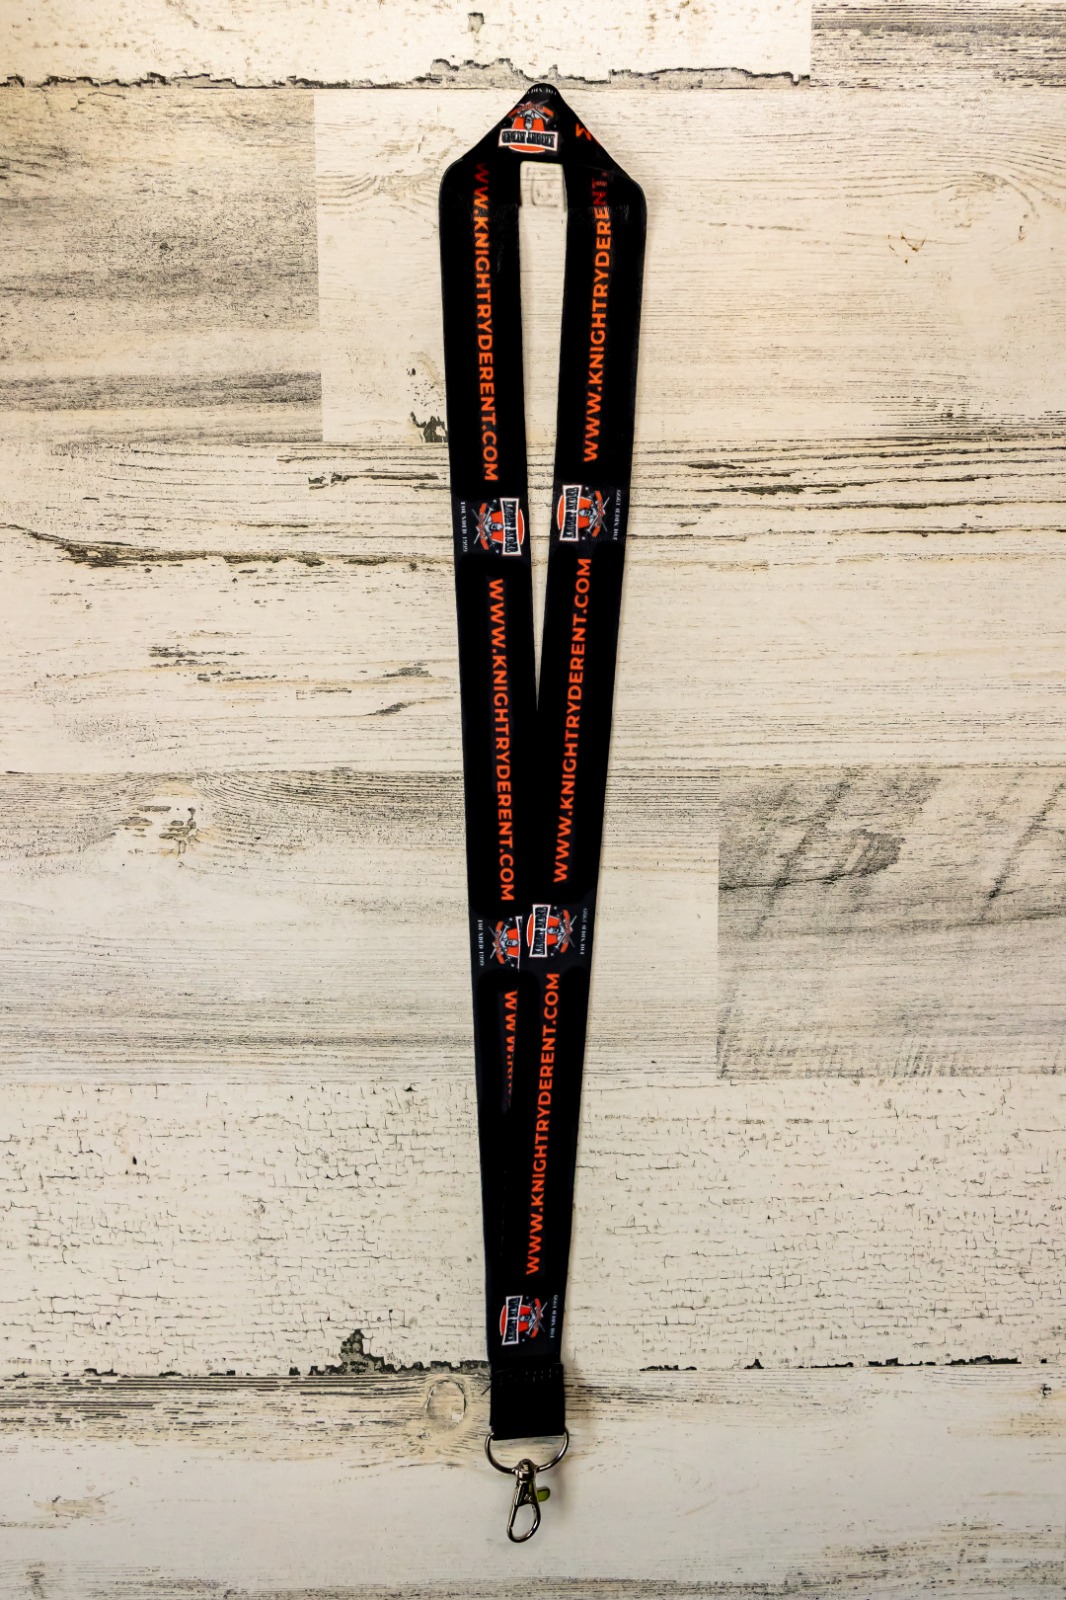 A pair of black and orange lanyards on top of a wooden table.